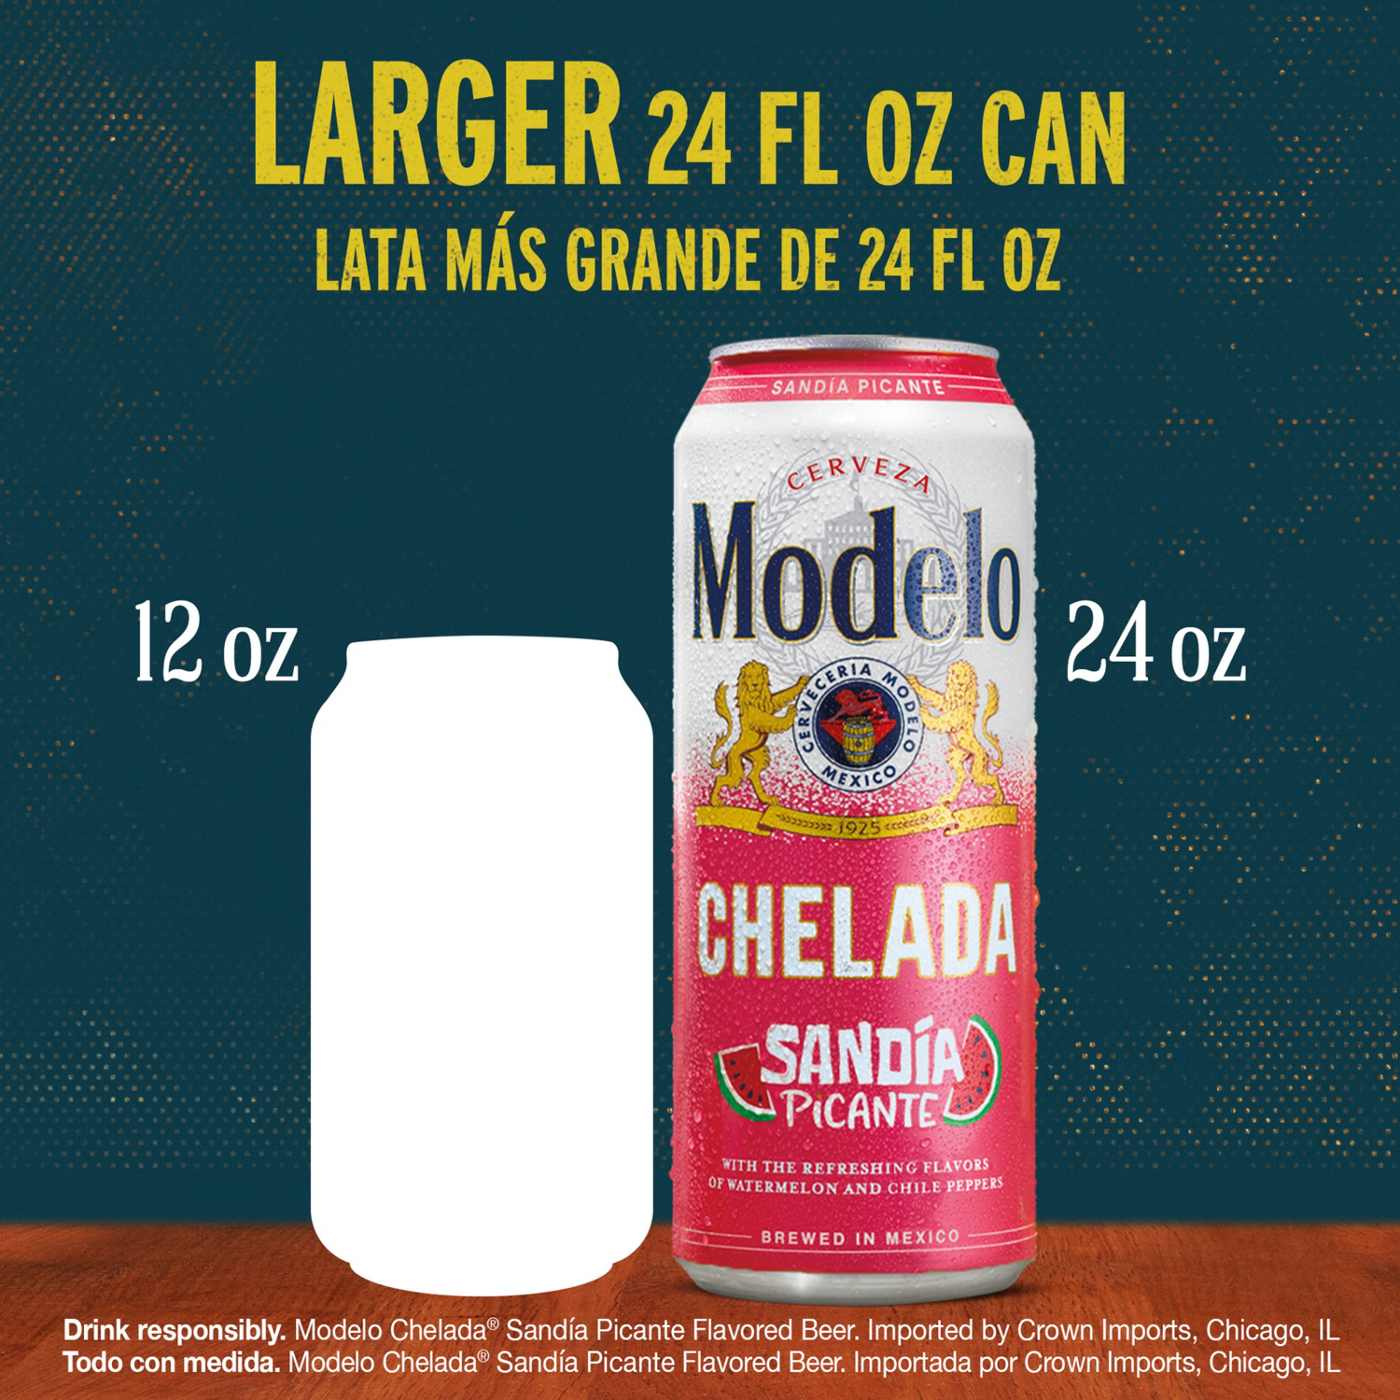 Modelo Chelada Sandia Picante Mexican Import Flavored Beer 24 oz Can; image 6 of 9